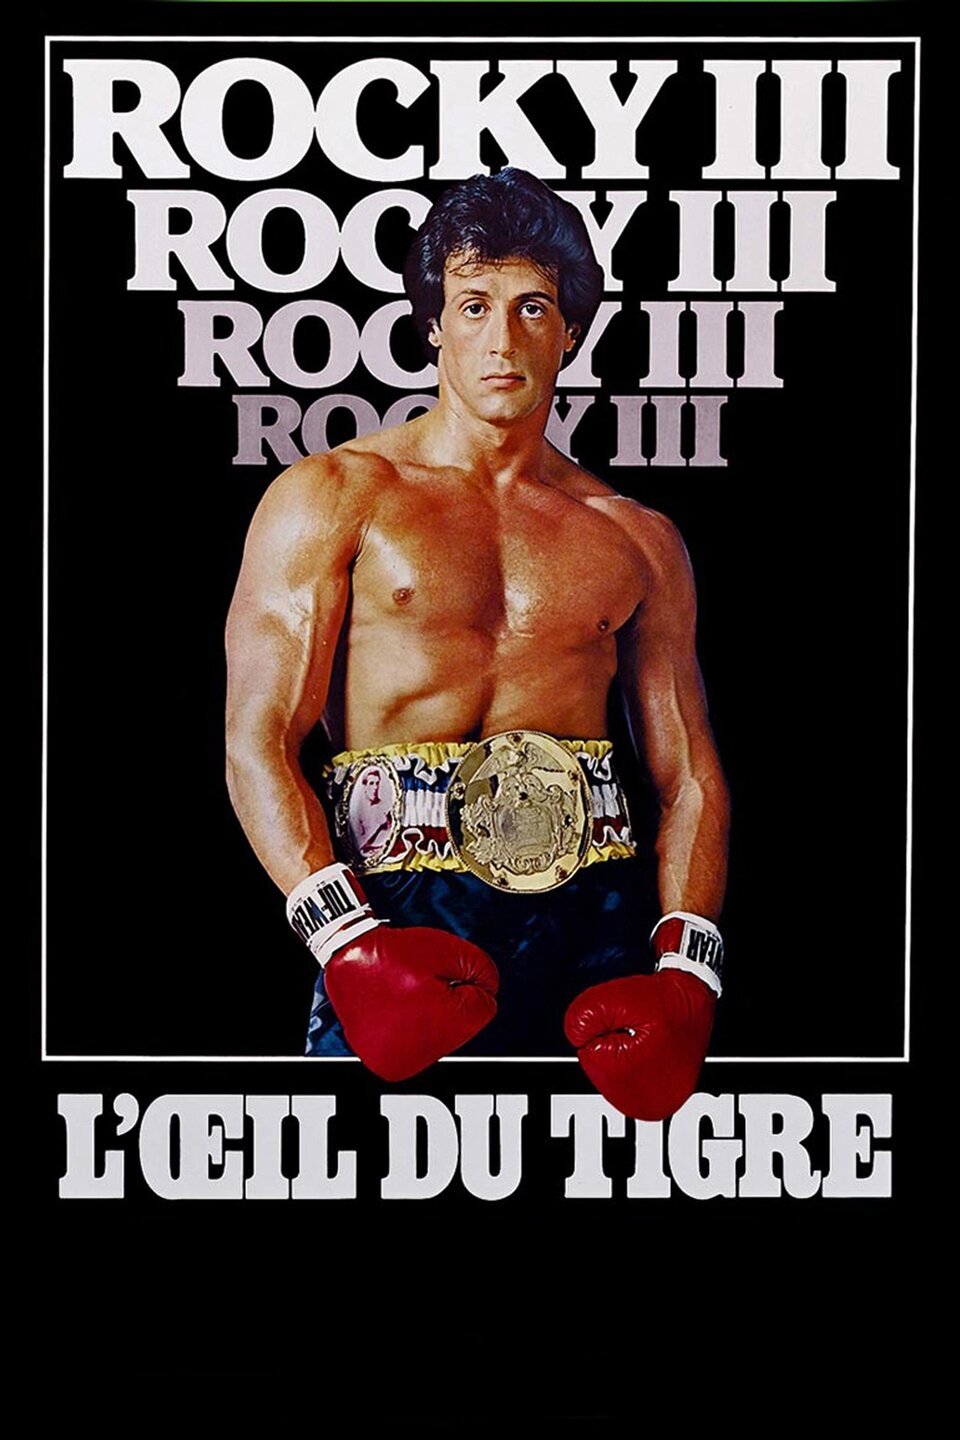 Rocky Balboa 41 Motivational Quote Boxing Legend Poster Stallone Sport Star